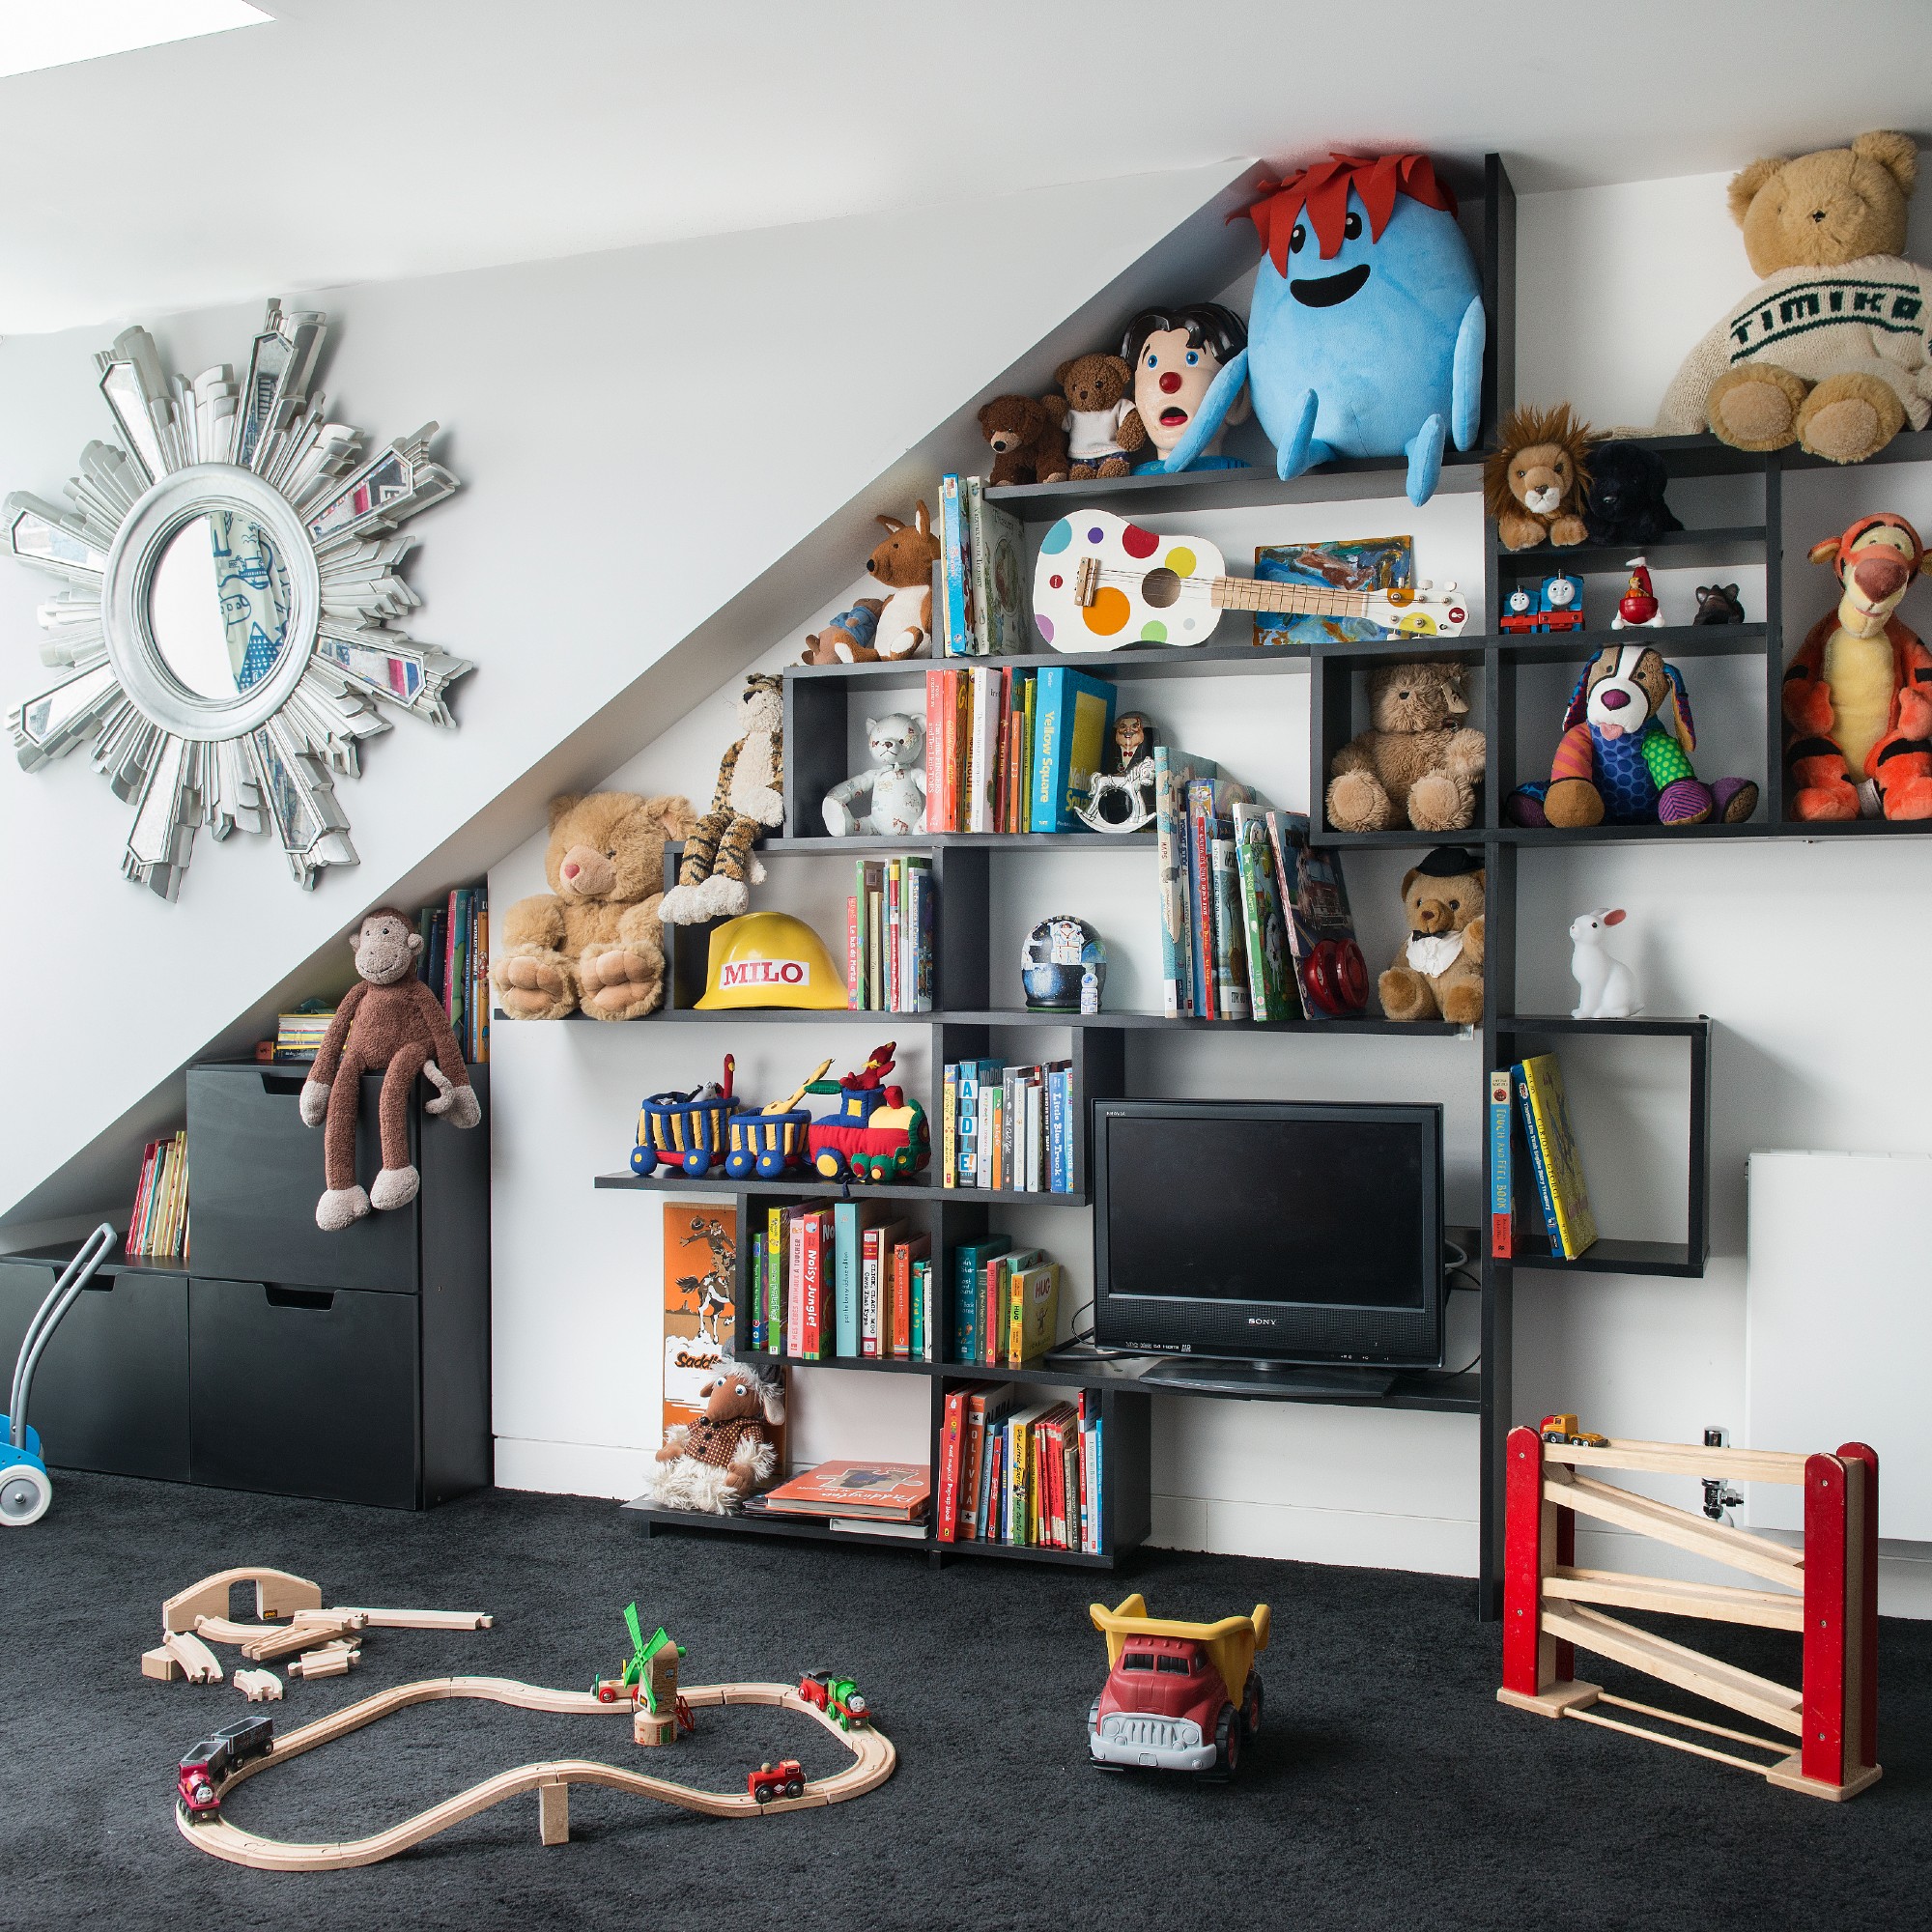 A slanted bookshelf filled with toys